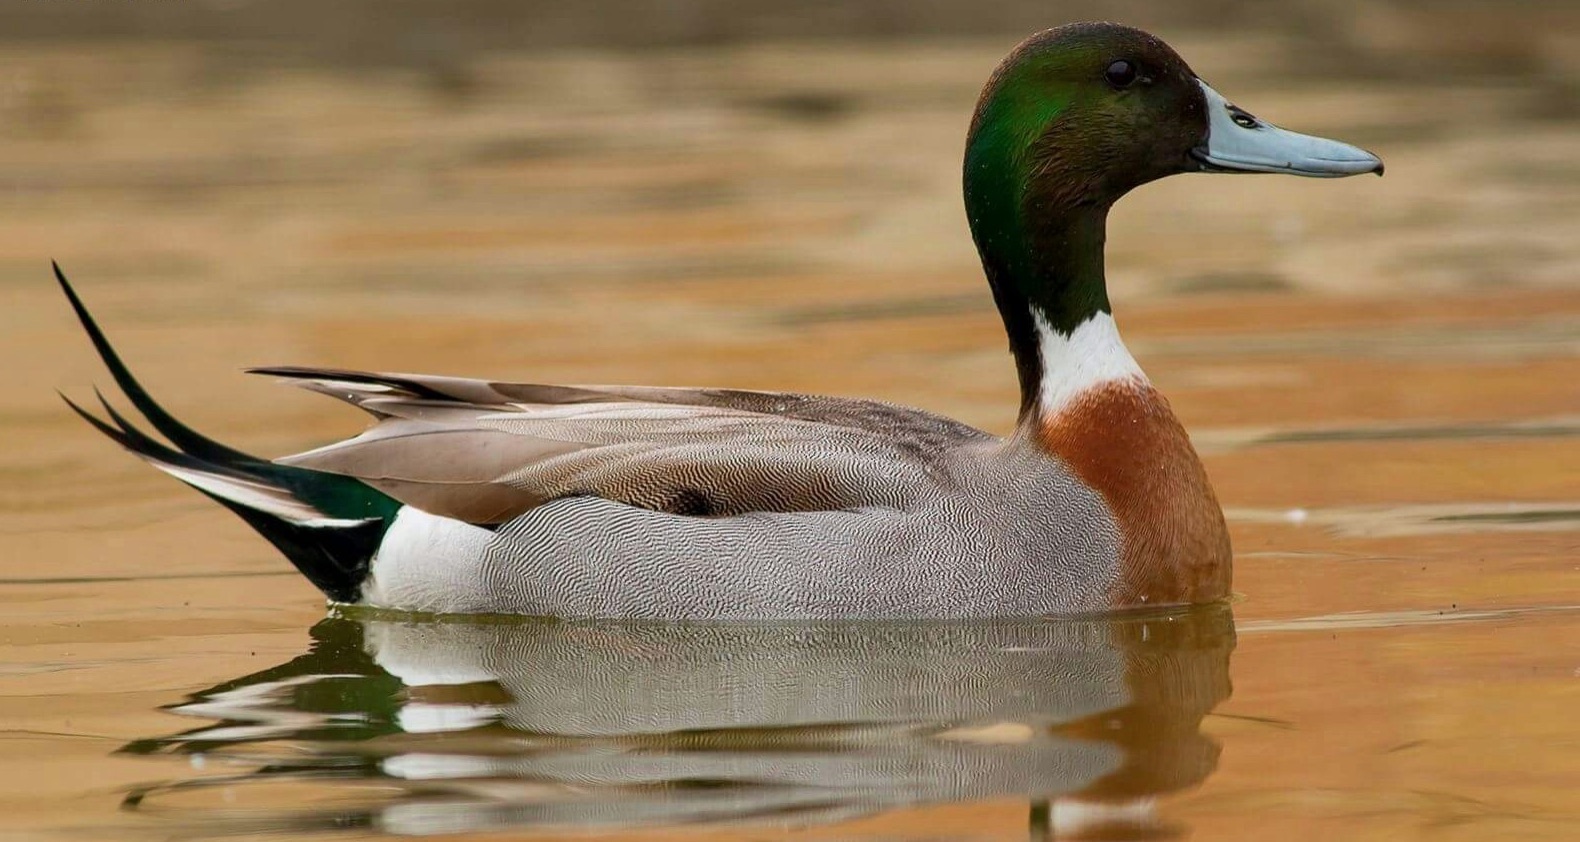 Mallard/pintail hybrids are the most common.